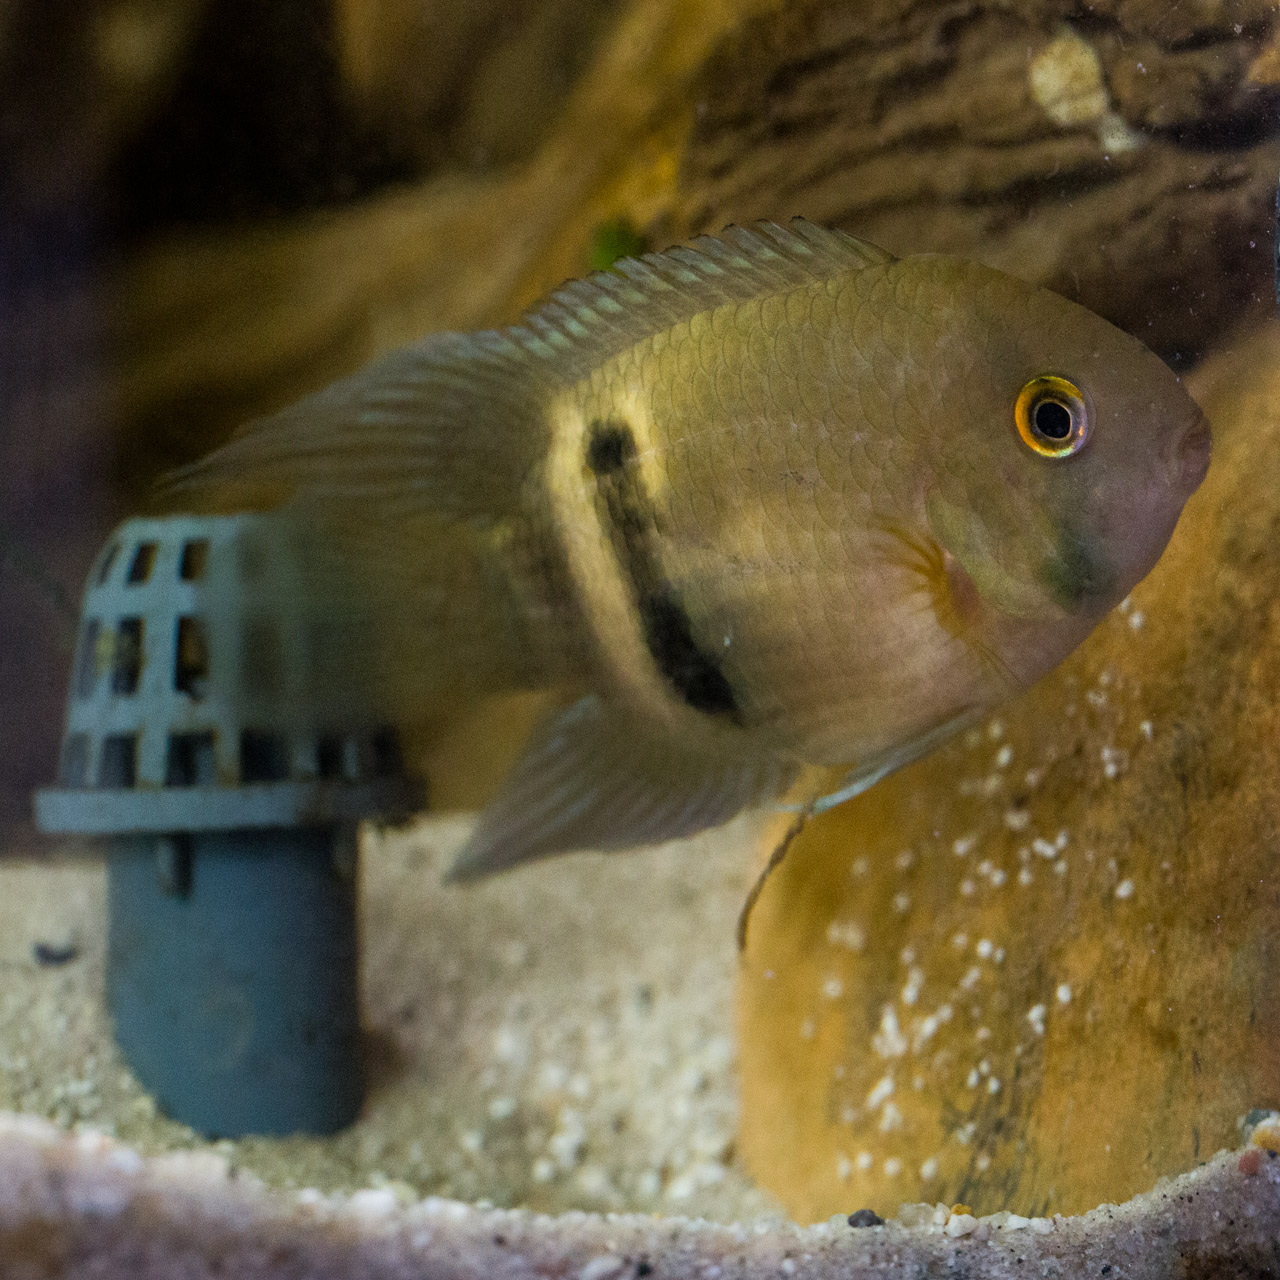 A keyhole cichlid defending its eggs that were laid on a rocky surface near the filter drain.